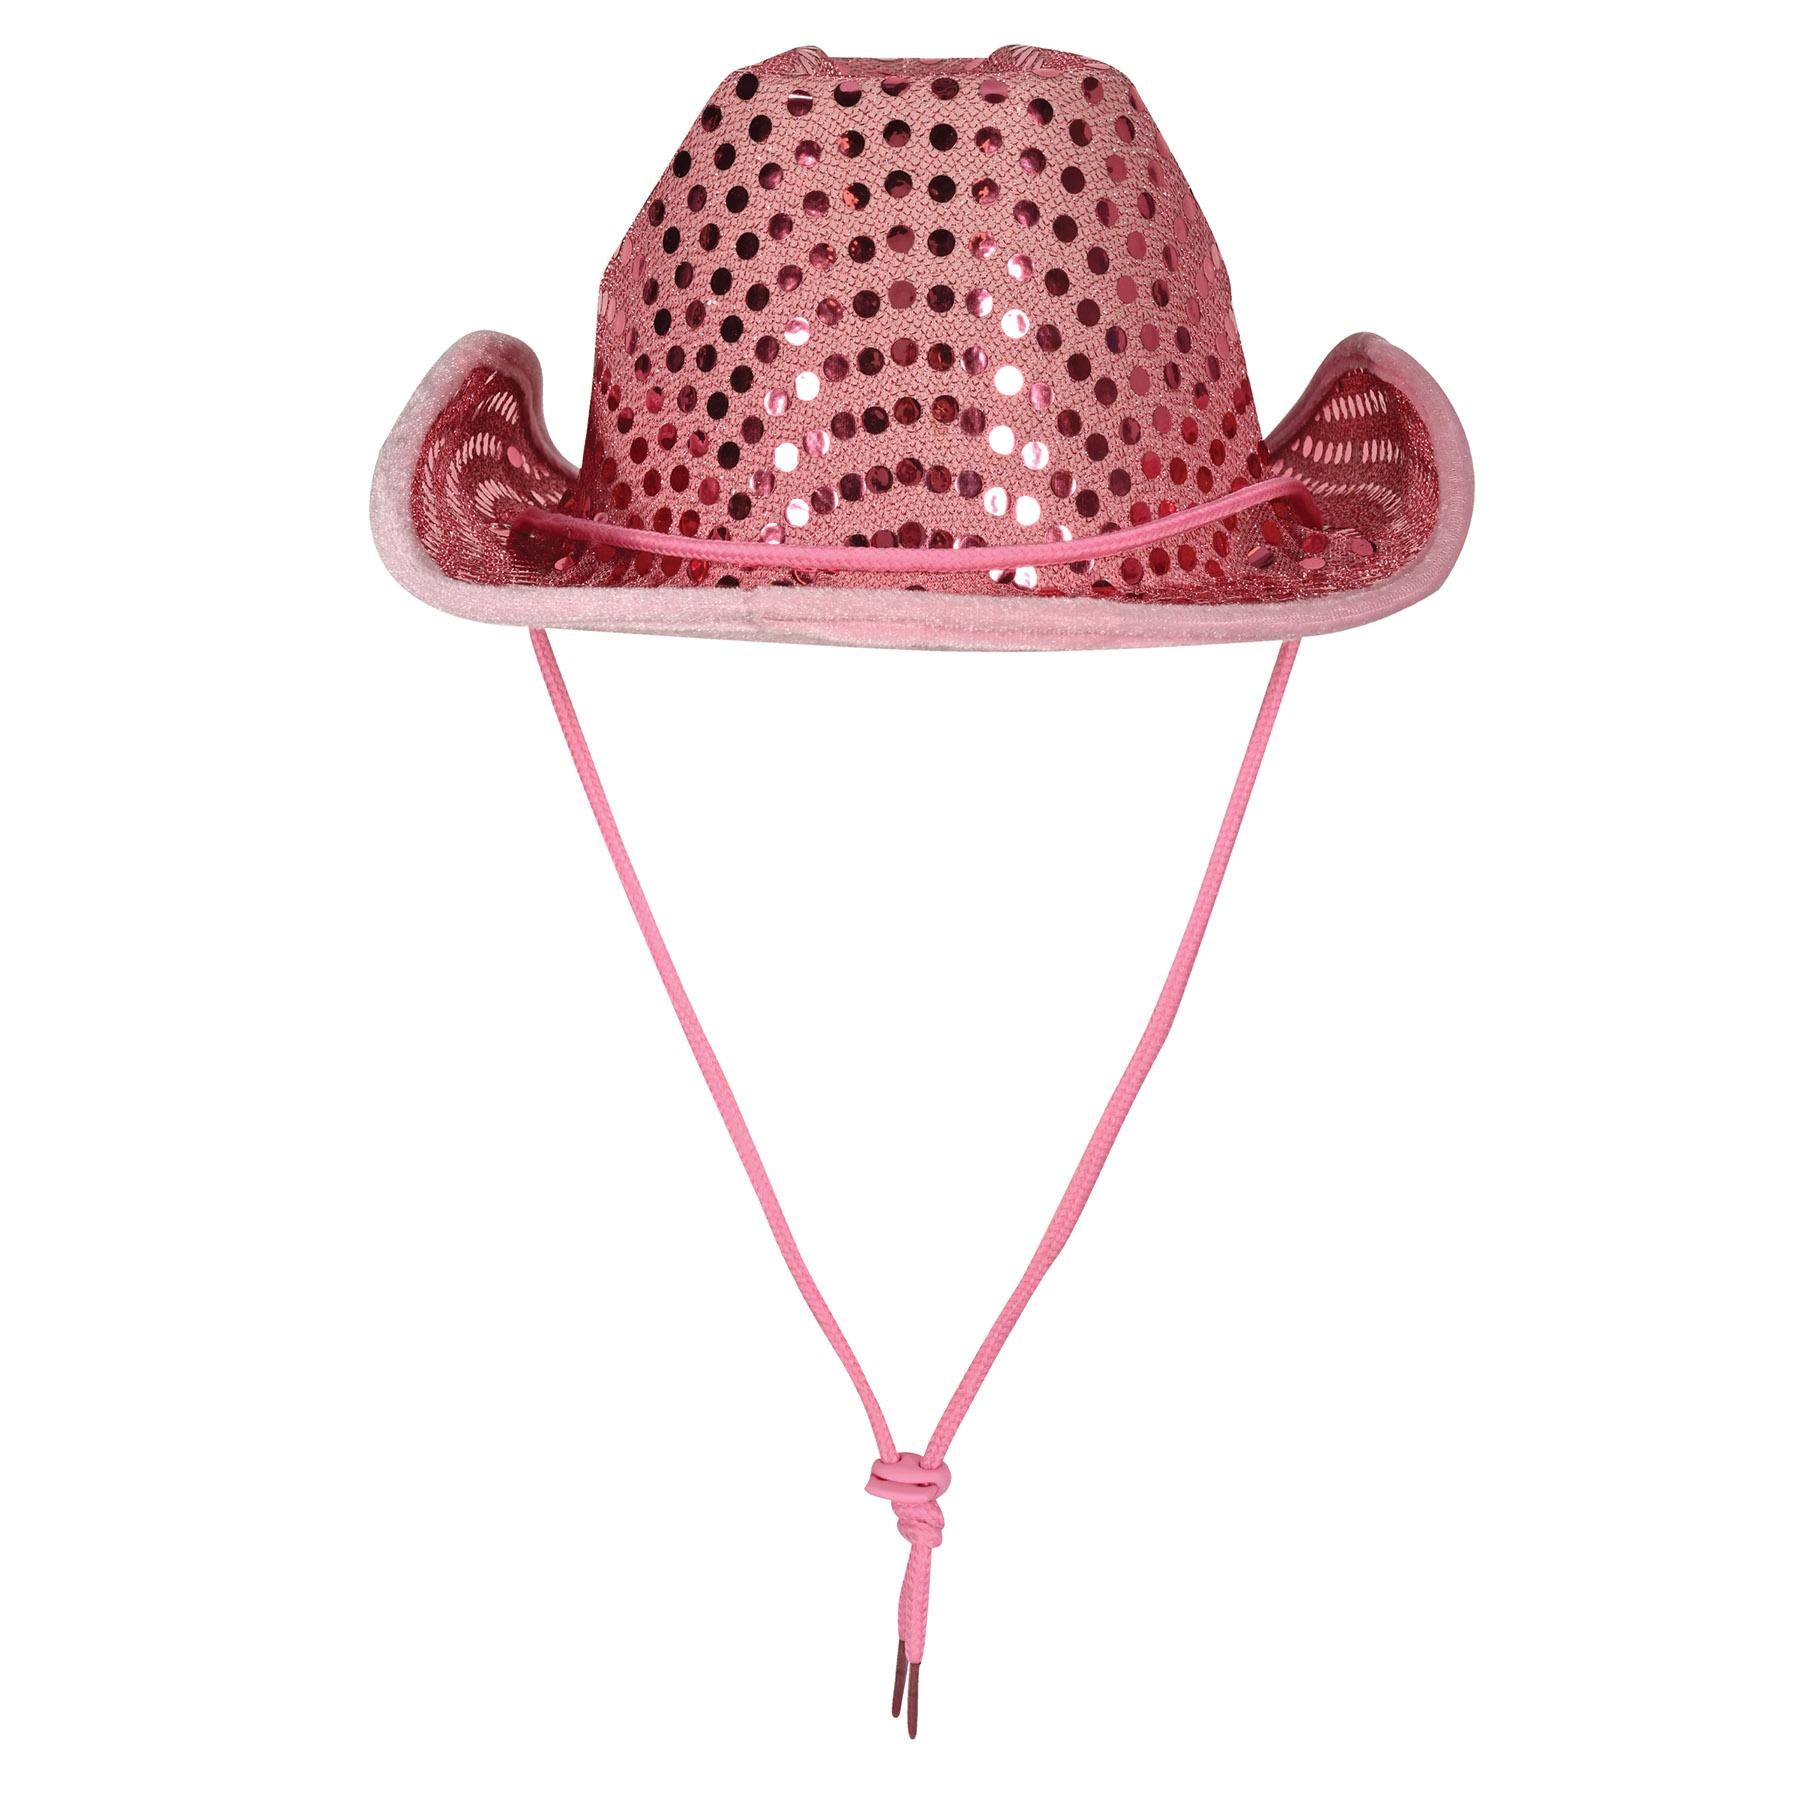 Sequined Cowboy Hat in Pink - Western Fabric Hat